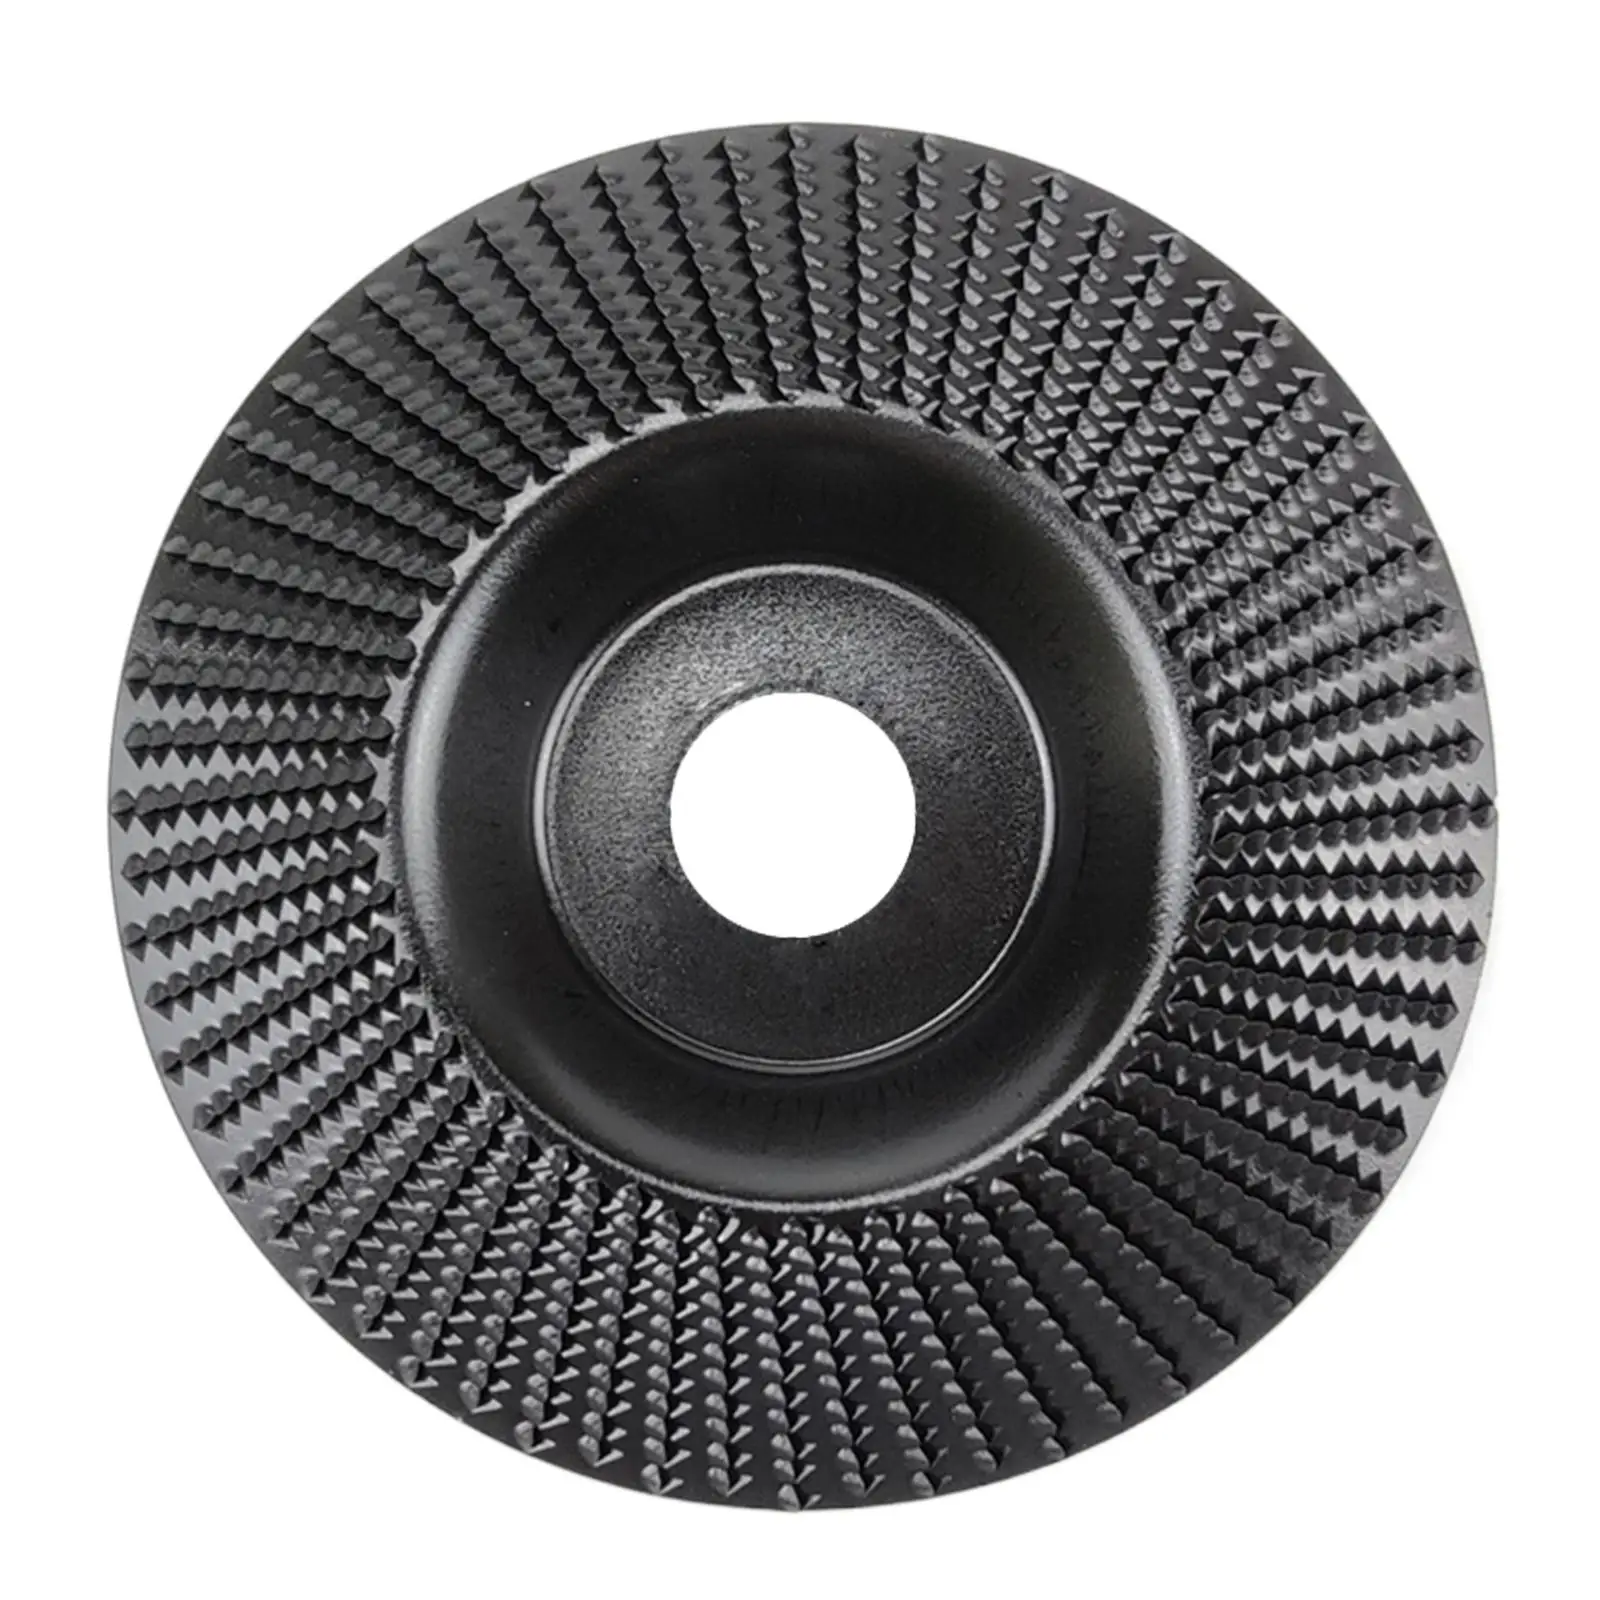 125mm Angle Grinder Disc Rotary Tool Polisher for Car Polishers Marble Metal